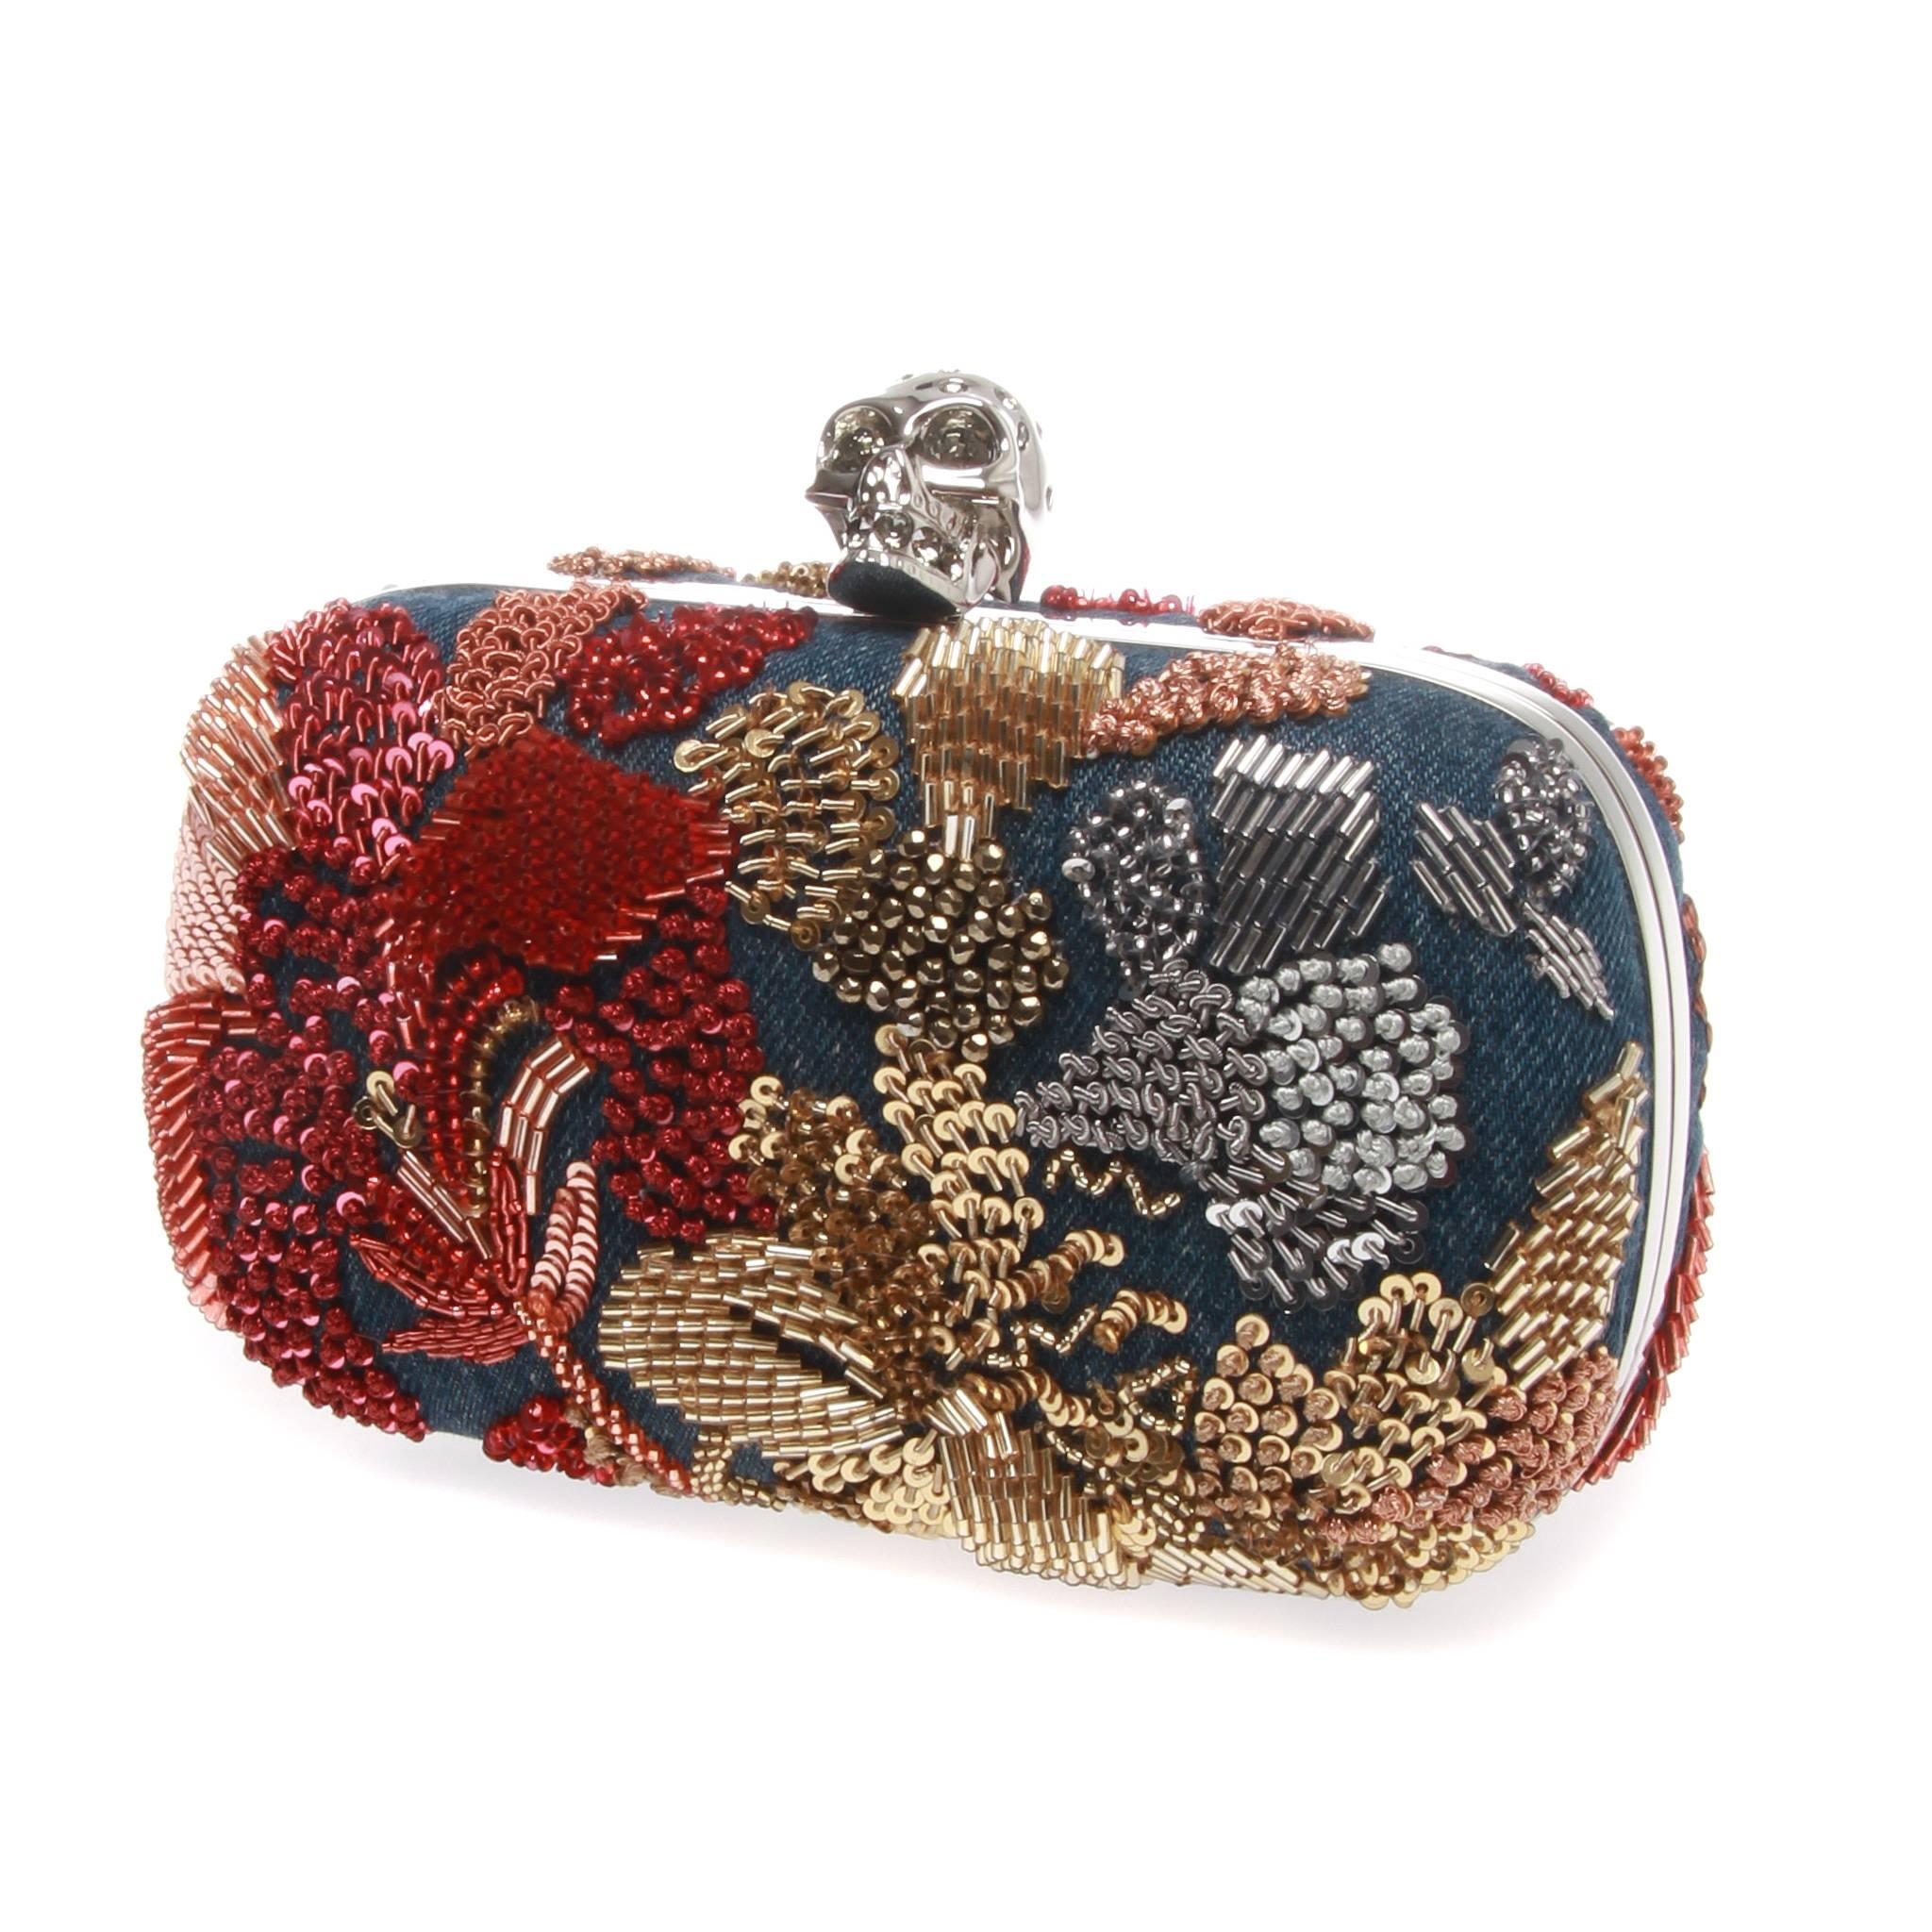 An exceptional-rare washed denim sequin embroidered clutch by ALEXANDER MCQUEEN.

It features Denim multi-colour flower embroidered skull clutch, front and back floral sequin embroidery and skull Clasp closure features Swarovski eyes.

Comes with